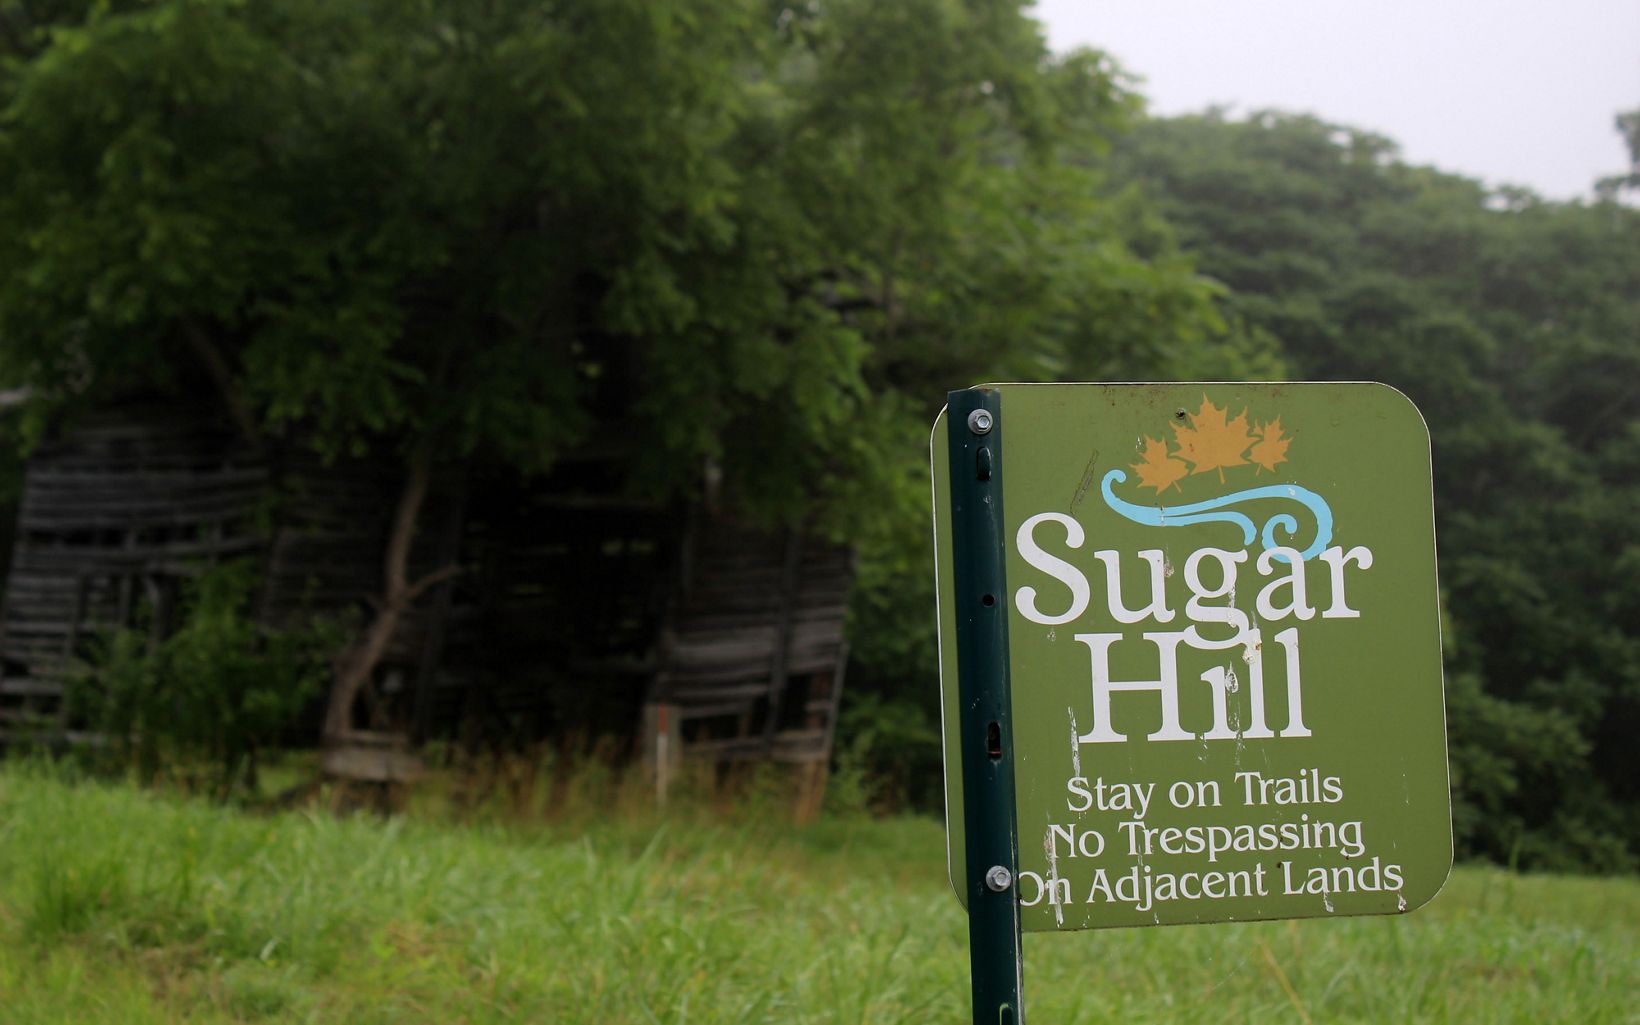 Sugar Hill Trail Located in Virginia's Clinch Valley near St. Paul, Sugar Hill is slated to become part of the commonwealth's newest state park. © Daniel White / TNC